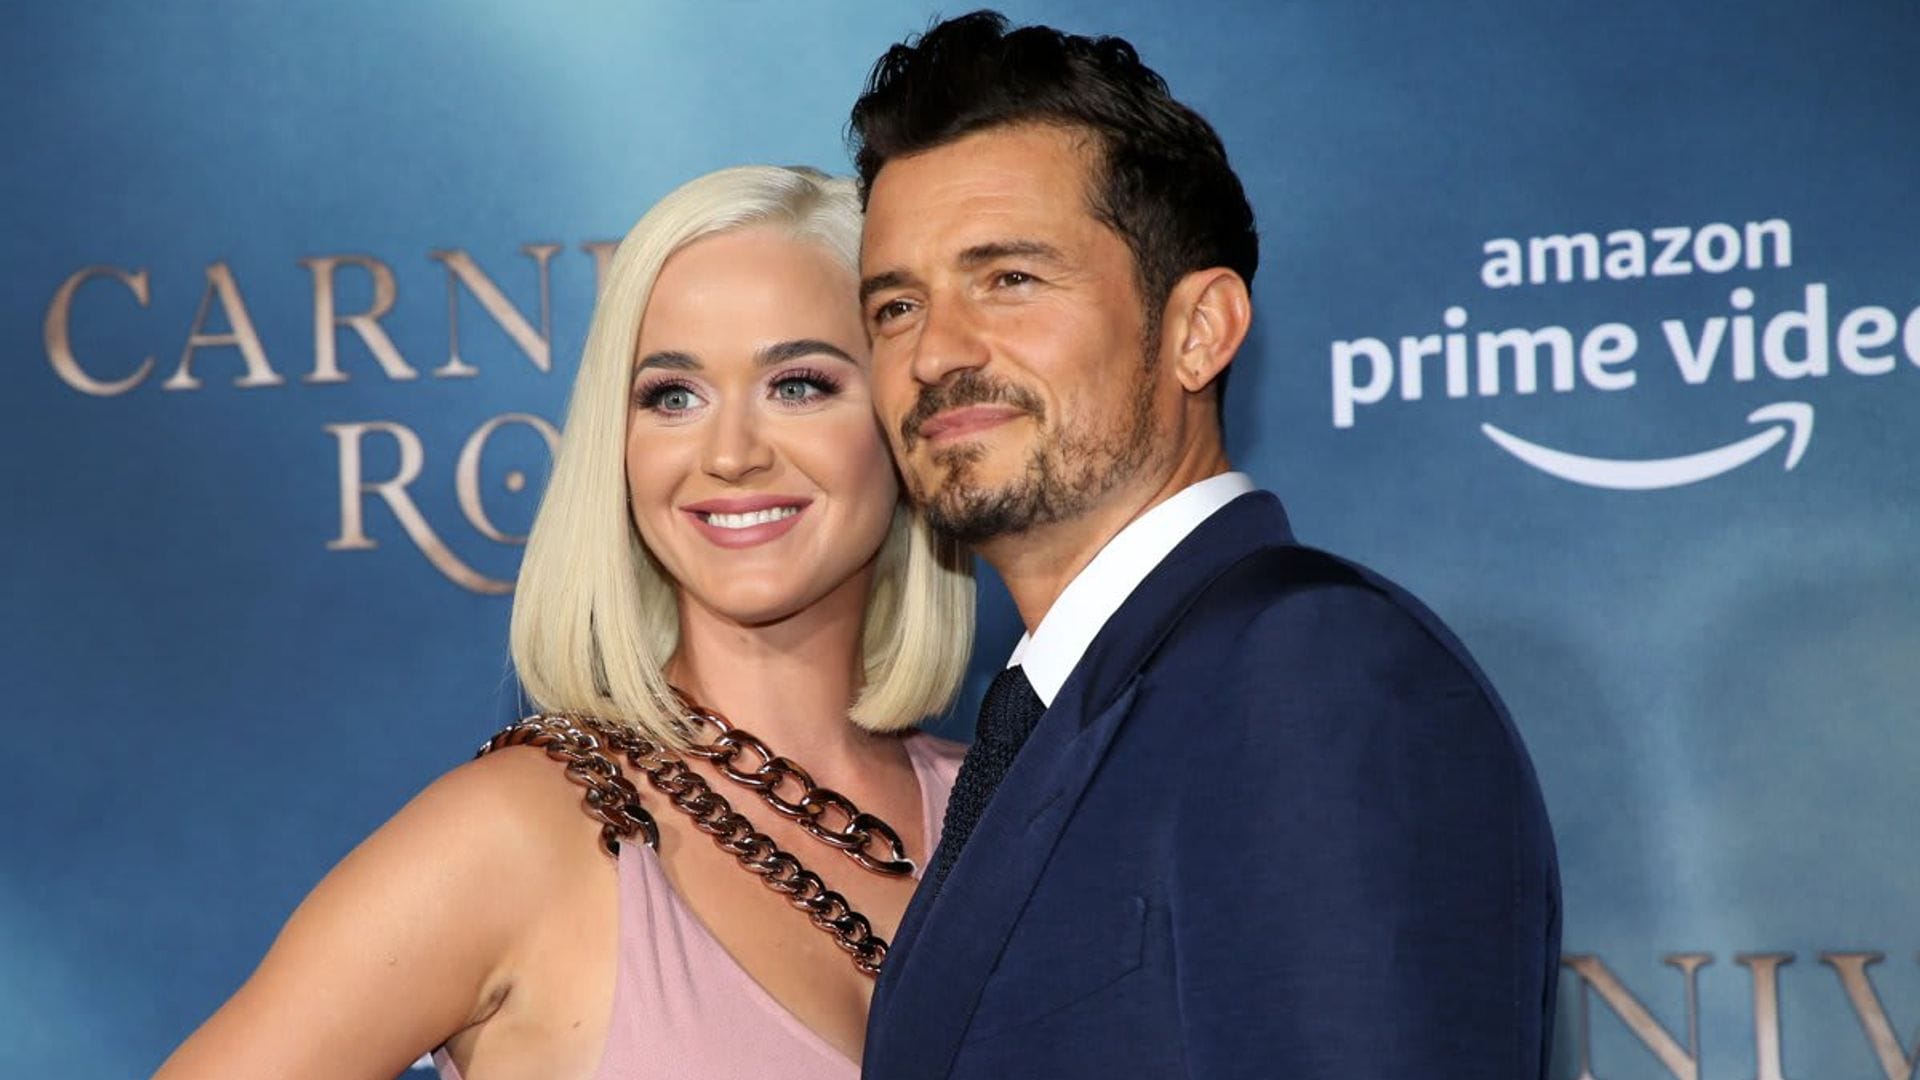 Katy Perry plans to release a new documentary about her private life